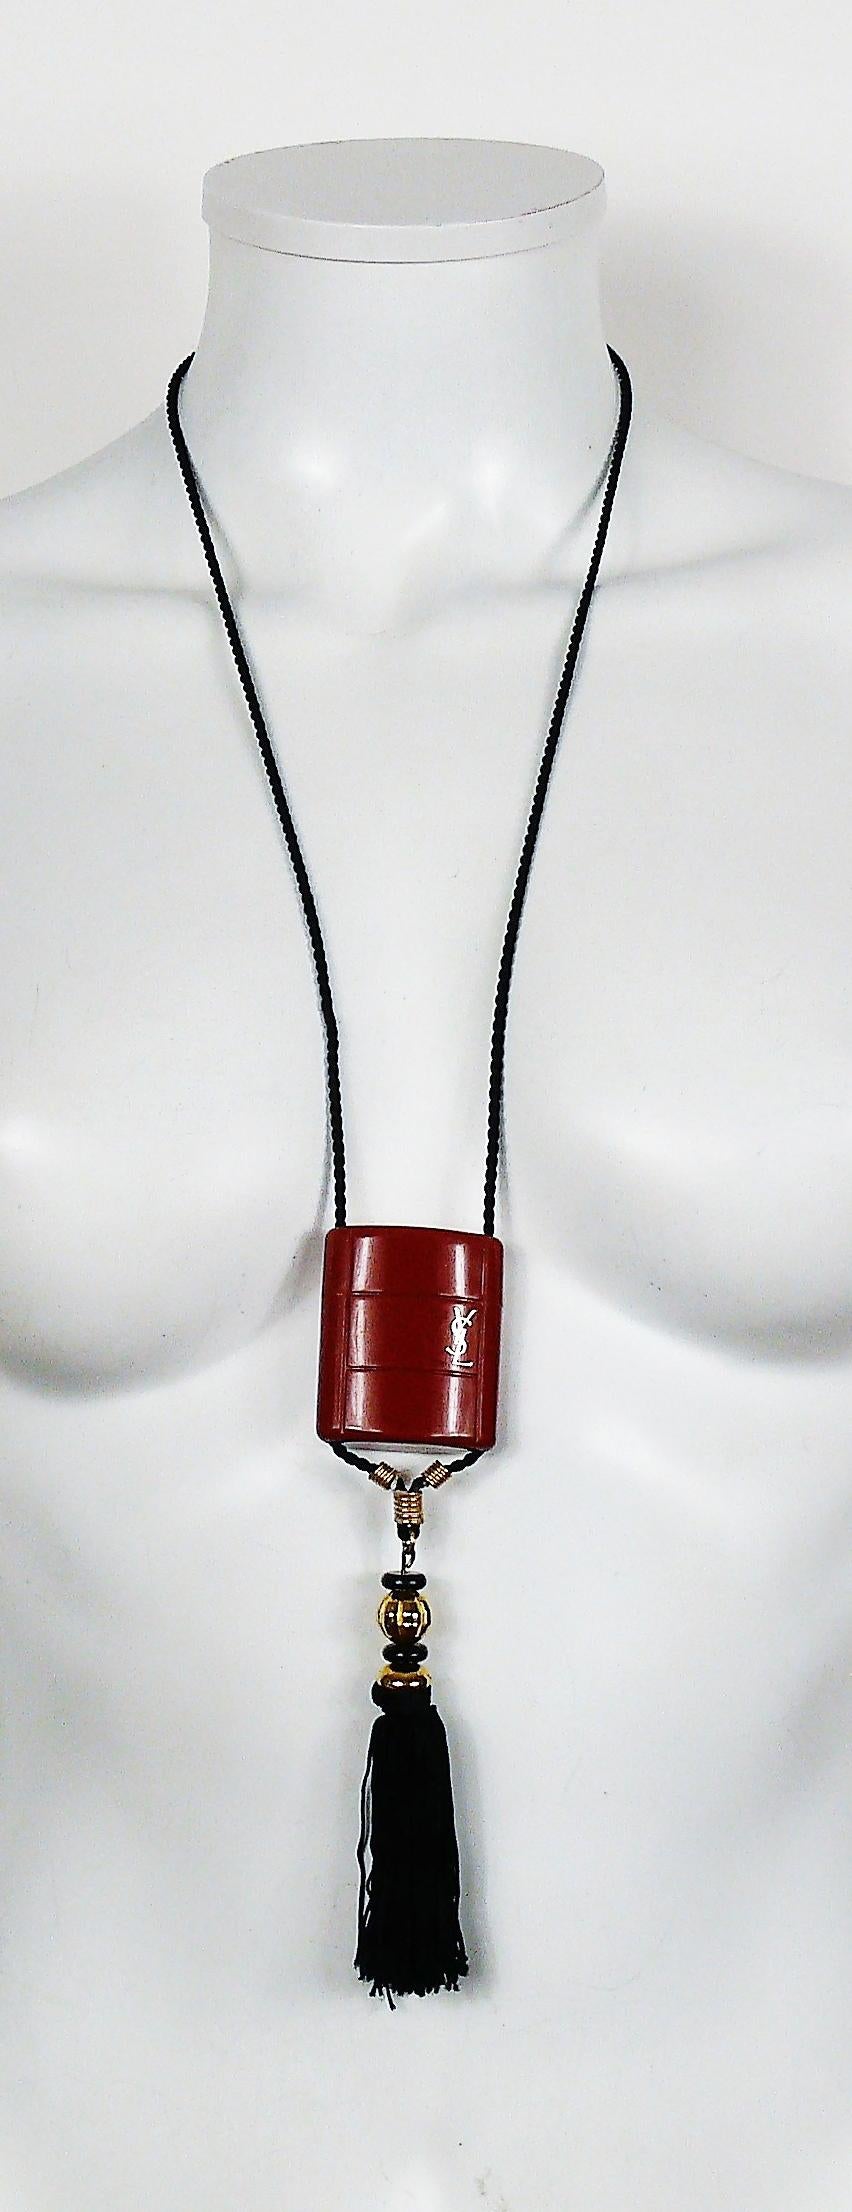 YVES SAINT LAURENT vintage OPIUM inro pendant necklace.

This necklace consists of a black cord, a burnt orange plastic container, a silk tassel adorned with black and gold tone beads.

Plastic container opens to insert a miniature bottle (no bottle